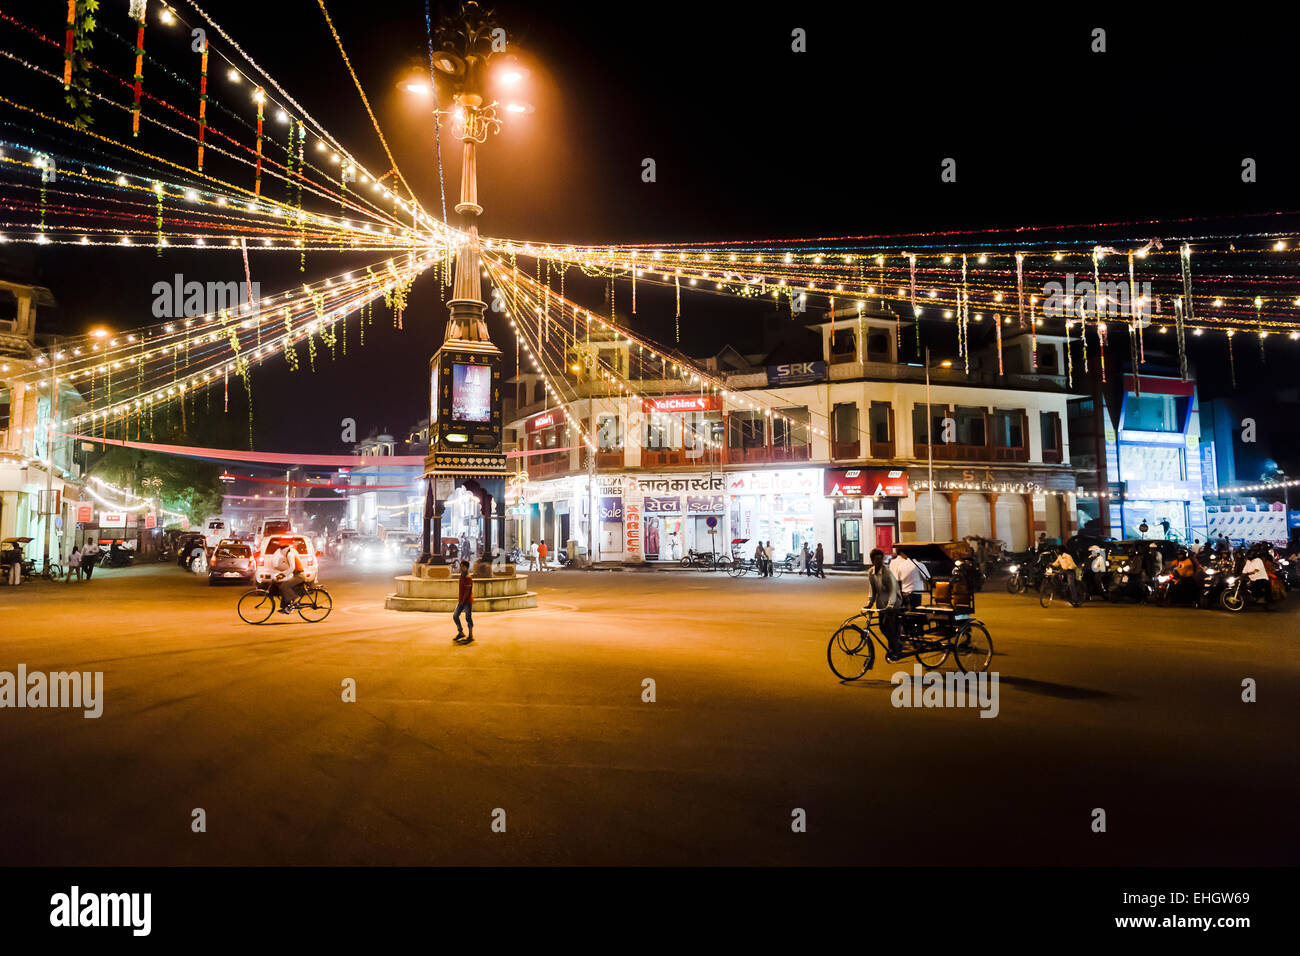 A roundabout at night decorated with lights for the Diwali festival in Jaipur. Stock Photo